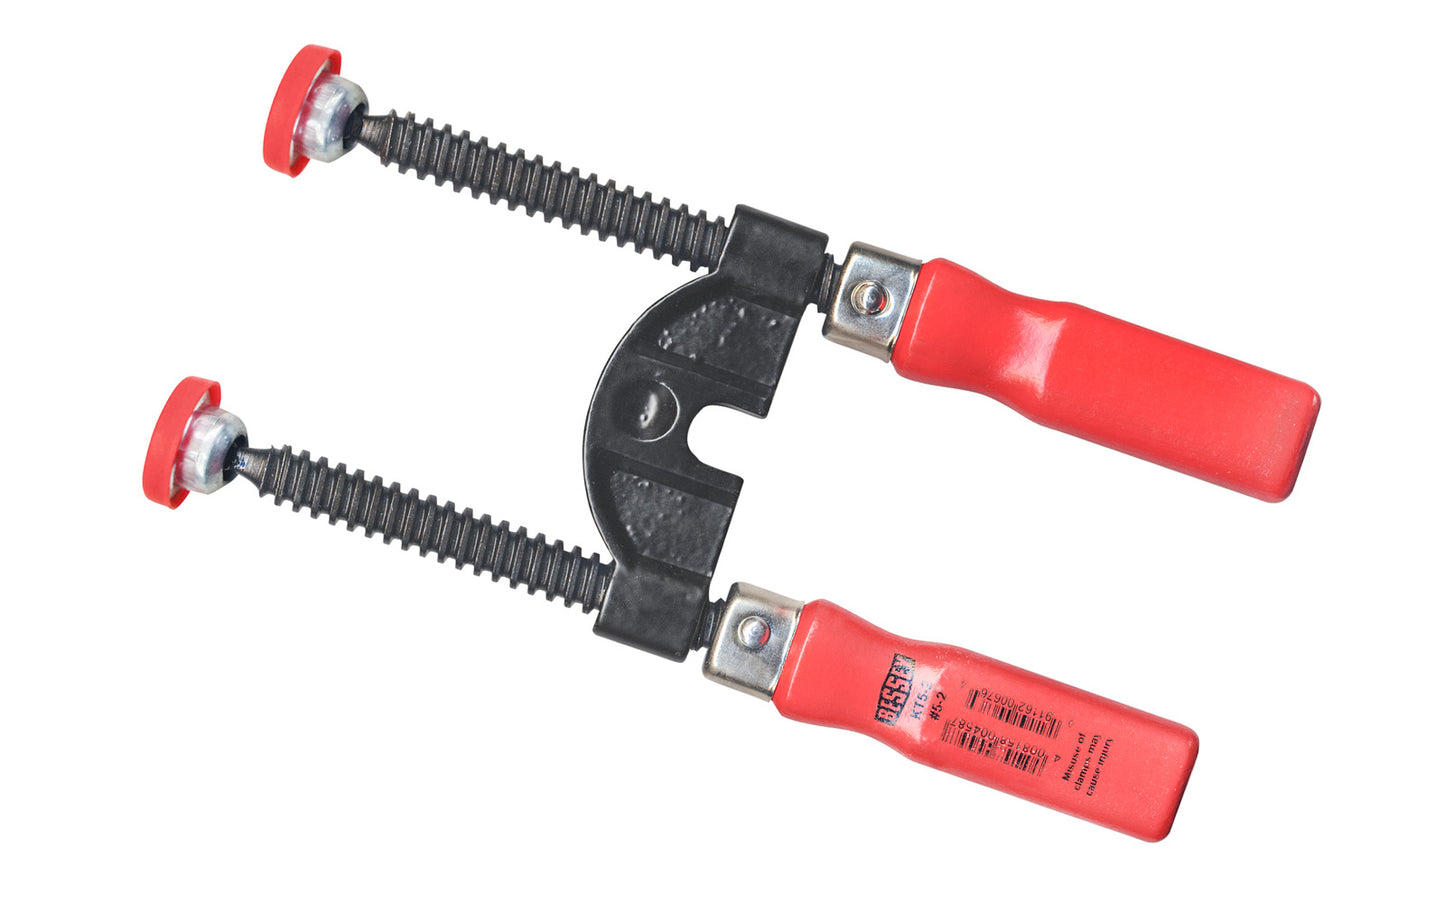 These Bessey Double Screw edge clamps are suitable for conventional screw clamps with a max rail thickness of 1/2" (13 mm). Comes with two plastic pressure caps to protect the work surface - Model No. KT5-2 - 4008158004587 - Double Screws  - With Wooden Handles - Two Screw Edge Clamps - Double Screw Clamps